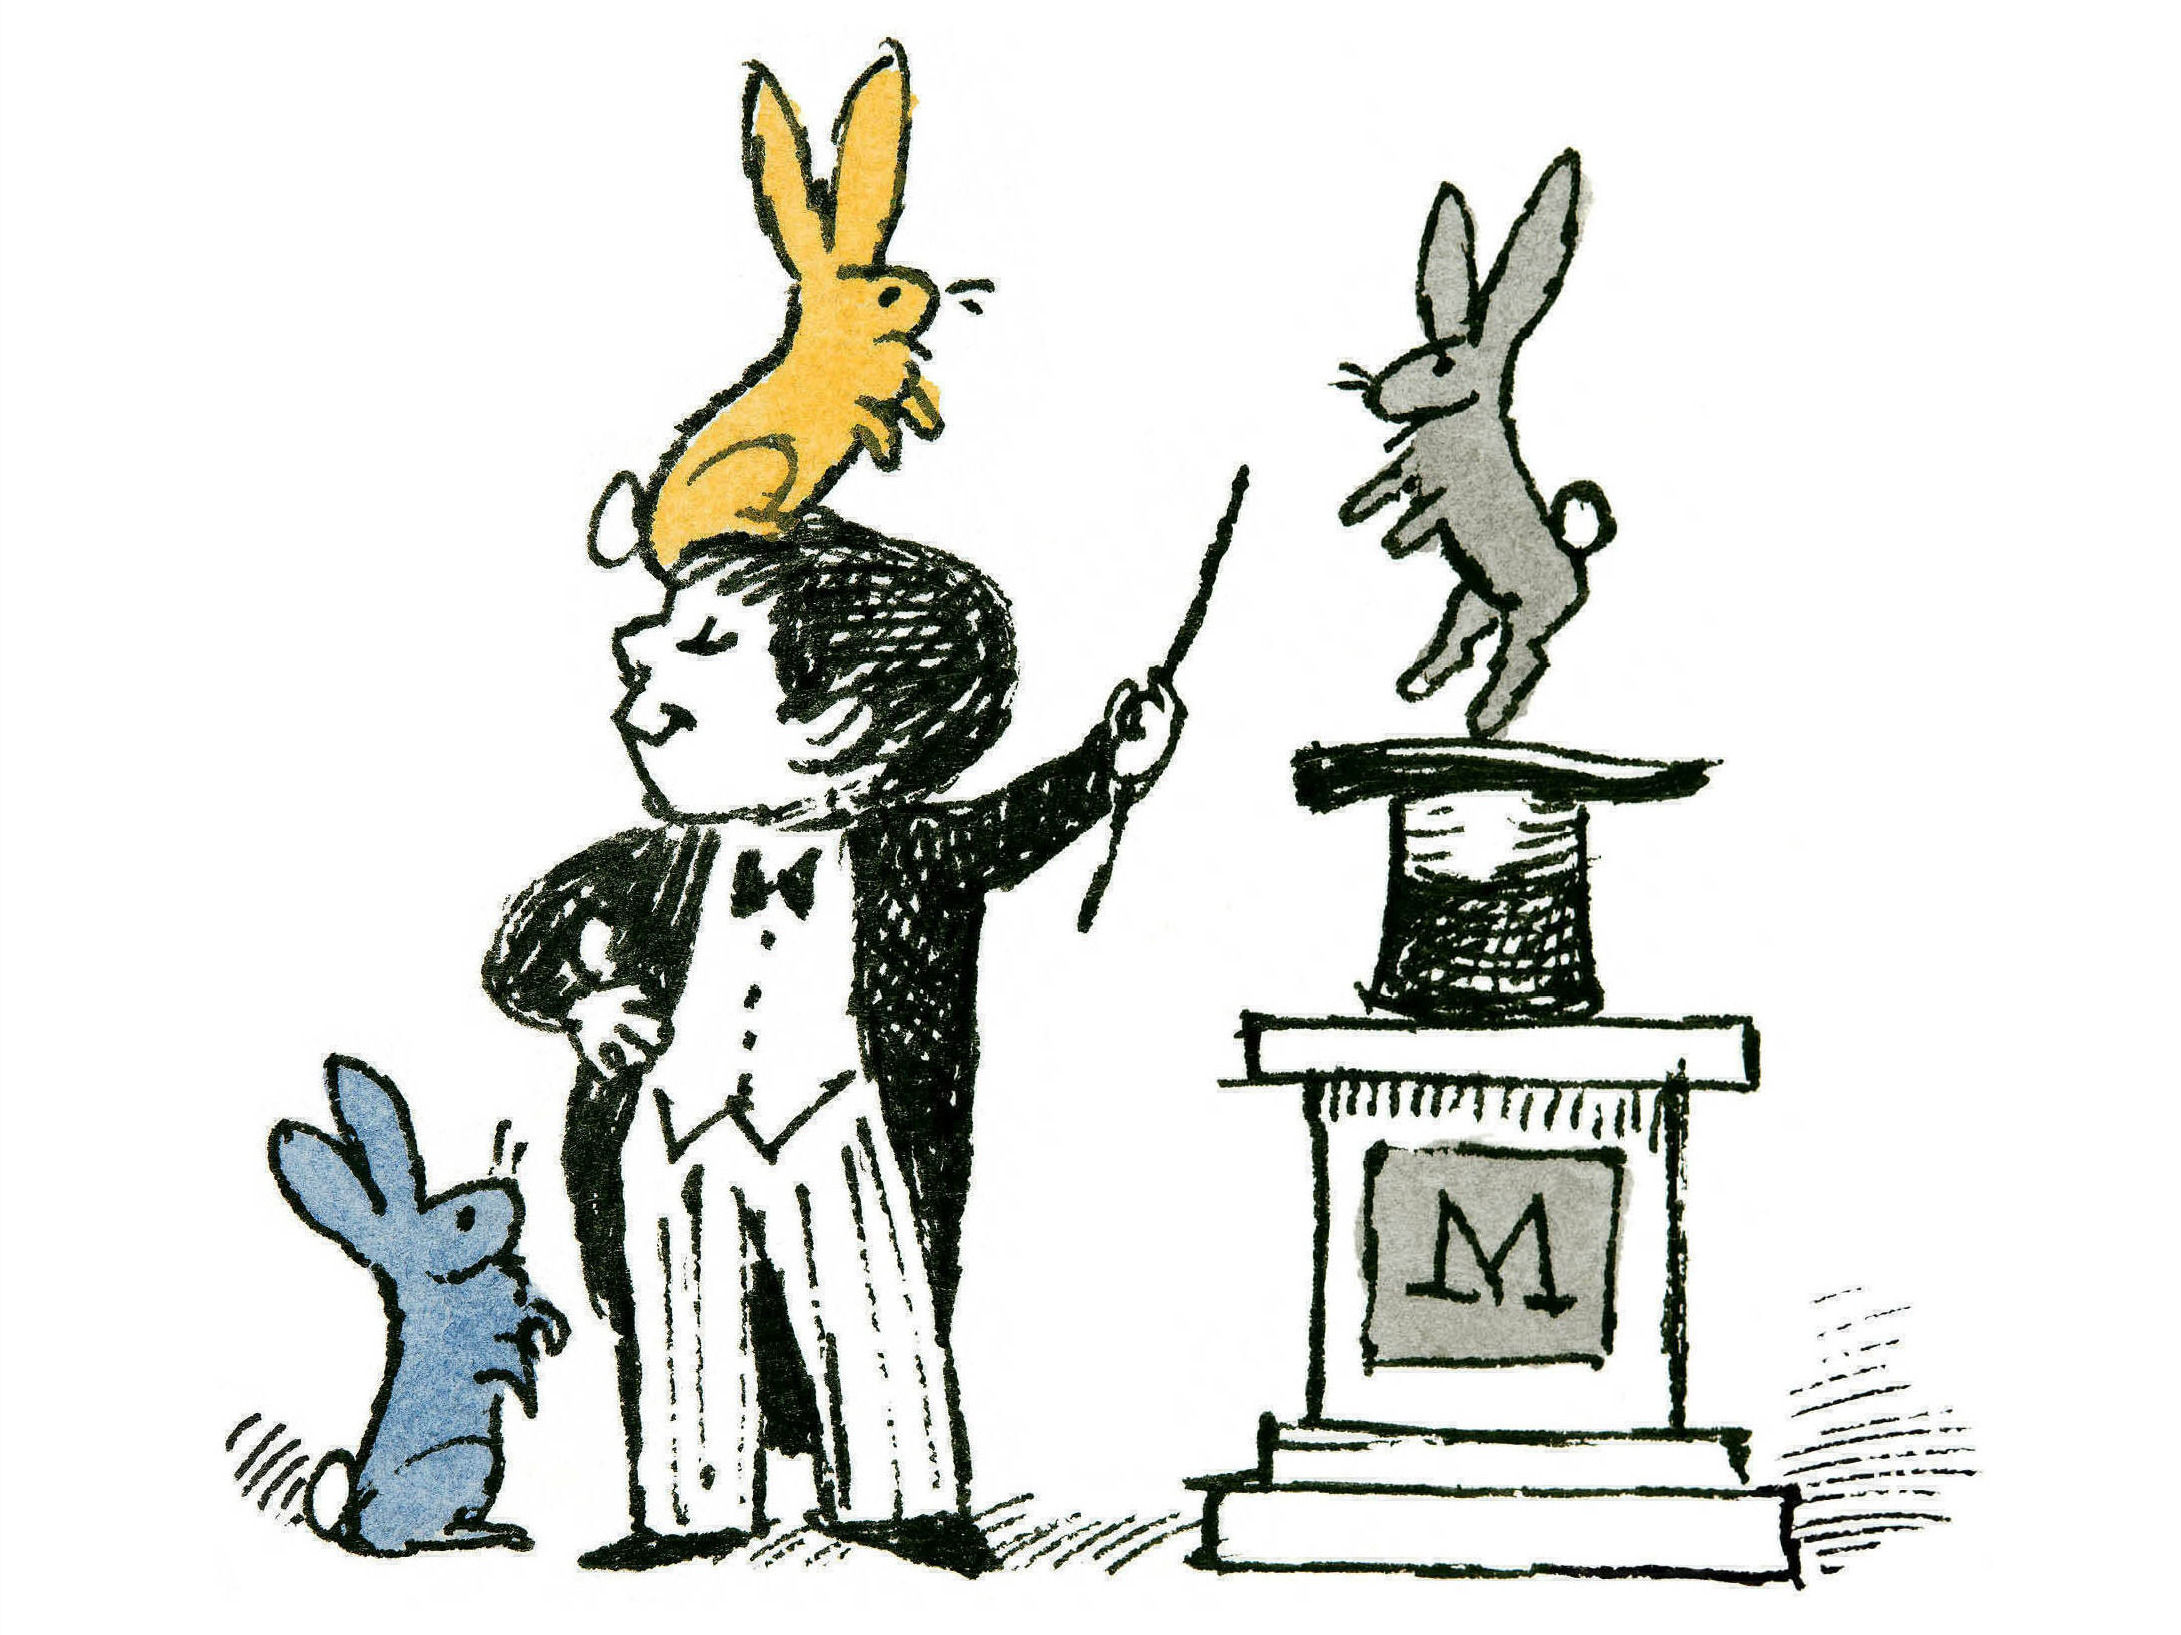 Maurice Sendak delights children with new book, 12 years after his death